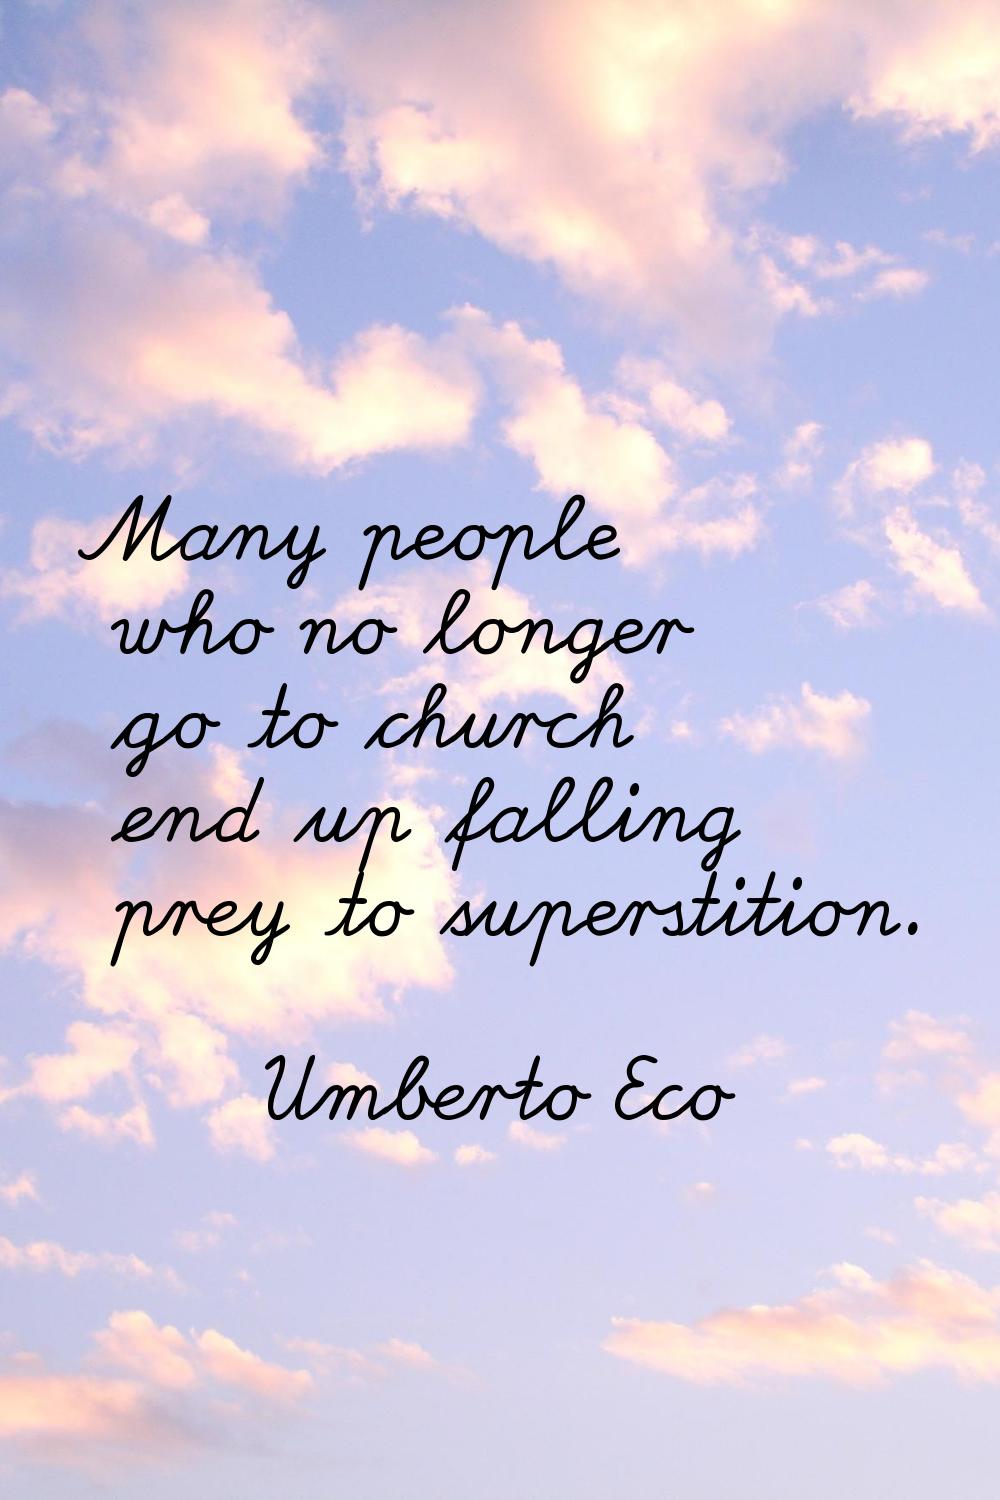 Many people who no longer go to church end up falling prey to superstition.